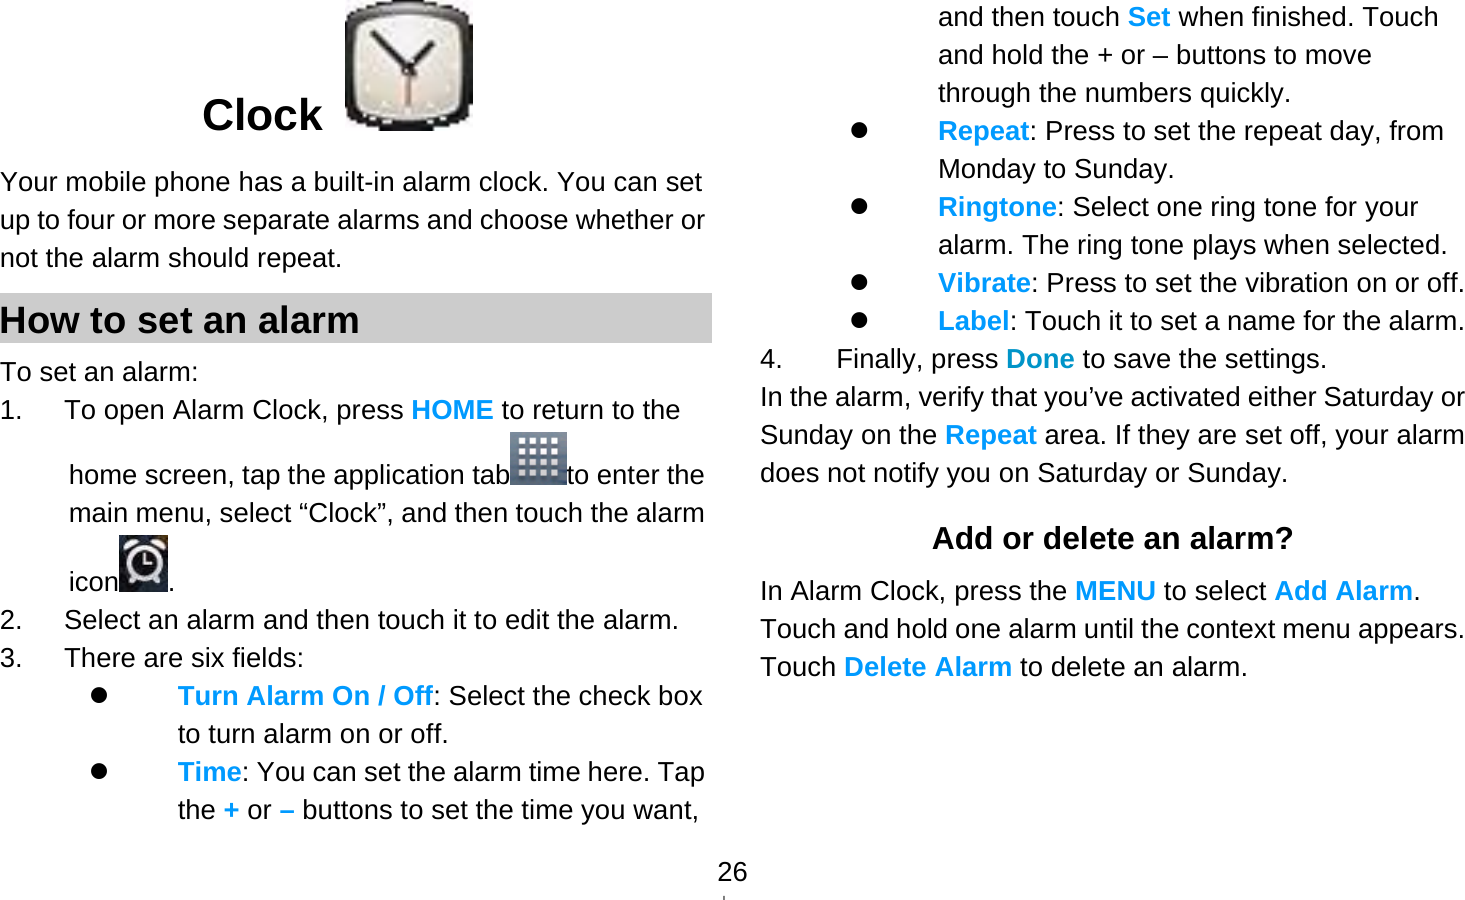   26Clock  Your mobile phone has a built-in alarm clock. You can set up to four or more separate alarms and choose whether or not the alarm should repeat.   How to set an alarm To set an alarm: 1.   To open Alarm Clock, press HOME to return to the home screen, tap the application tab to enter the main menu, select “Clock”, and then touch the alarm icon . 2.      Select an alarm and then touch it to edit the alarm. 3.   There are six fields:  Turn Alarm On / Off: Select the check box to turn alarm on or off.    Time: You can set the alarm time here. Tap the + or – buttons to set the time you want, and then touch Set when finished. Touch and hold the + or – buttons to move through the numbers quickly.  Repeat: Press to set the repeat day, from Monday to Sunday.  Ringtone: Select one ring tone for your alarm. The ring tone plays when selected.  Vibrate: Press to set the vibration on or off.  Label: Touch it to set a name for the alarm. 4. Finally, press Done to save the settings. In the alarm, verify that you’ve activated either Saturday or Sunday on the Repeat area. If they are set off, your alarm does not notify you on Saturday or Sunday. Add or delete an alarm? In Alarm Clock, press the MENU to select Add Alarm. Touch and hold one alarm until the context menu appears. Touch Delete Alarm to delete an alarm.  